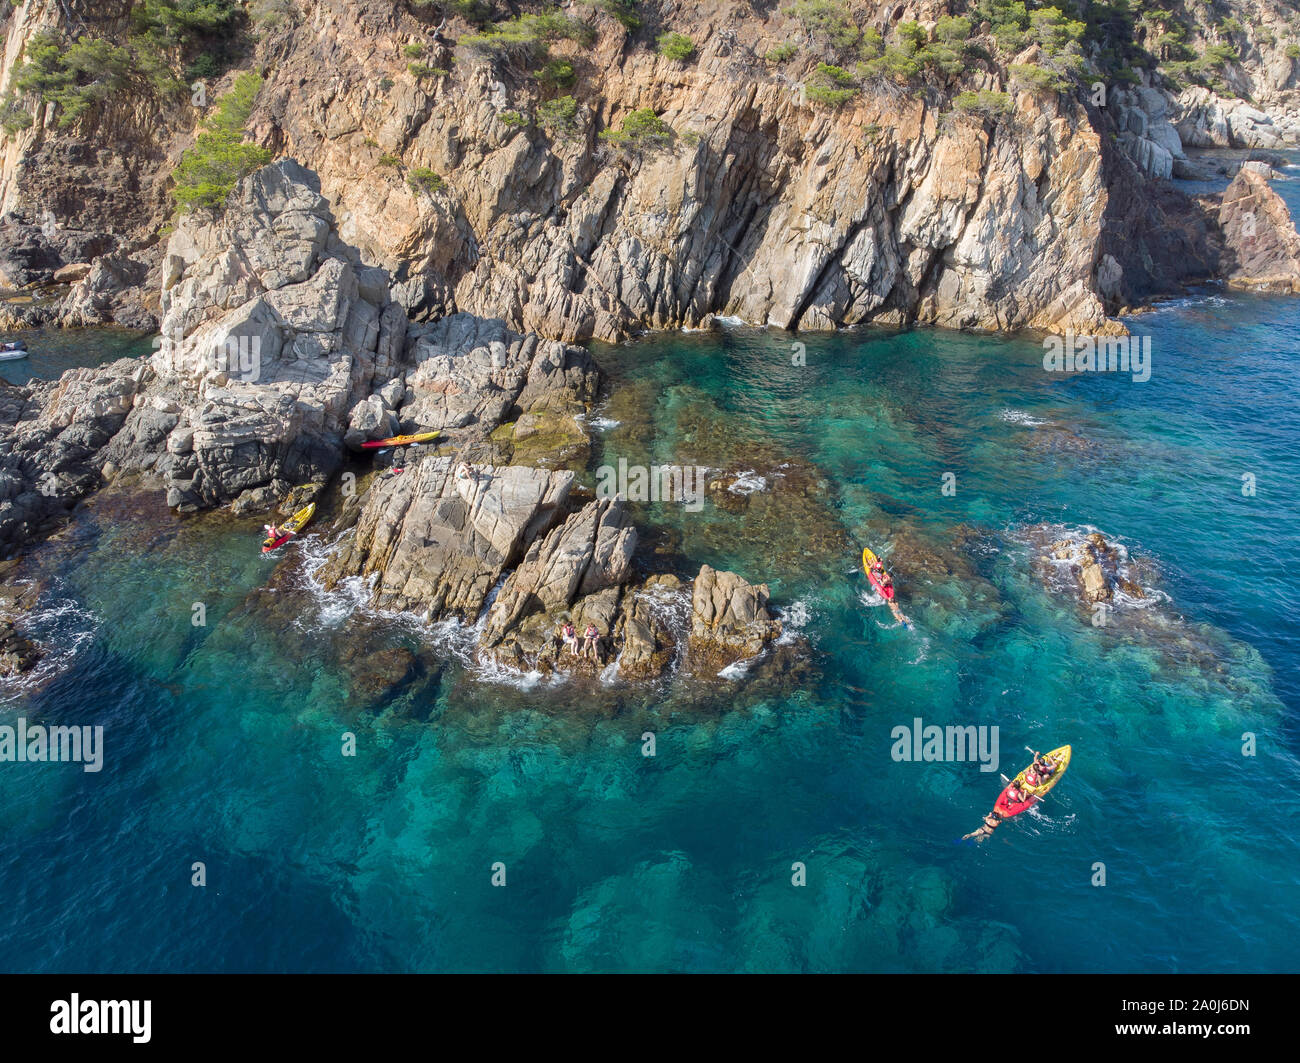 A group of friends playing and kayaking in a Mediterranean cove. Stock Photo